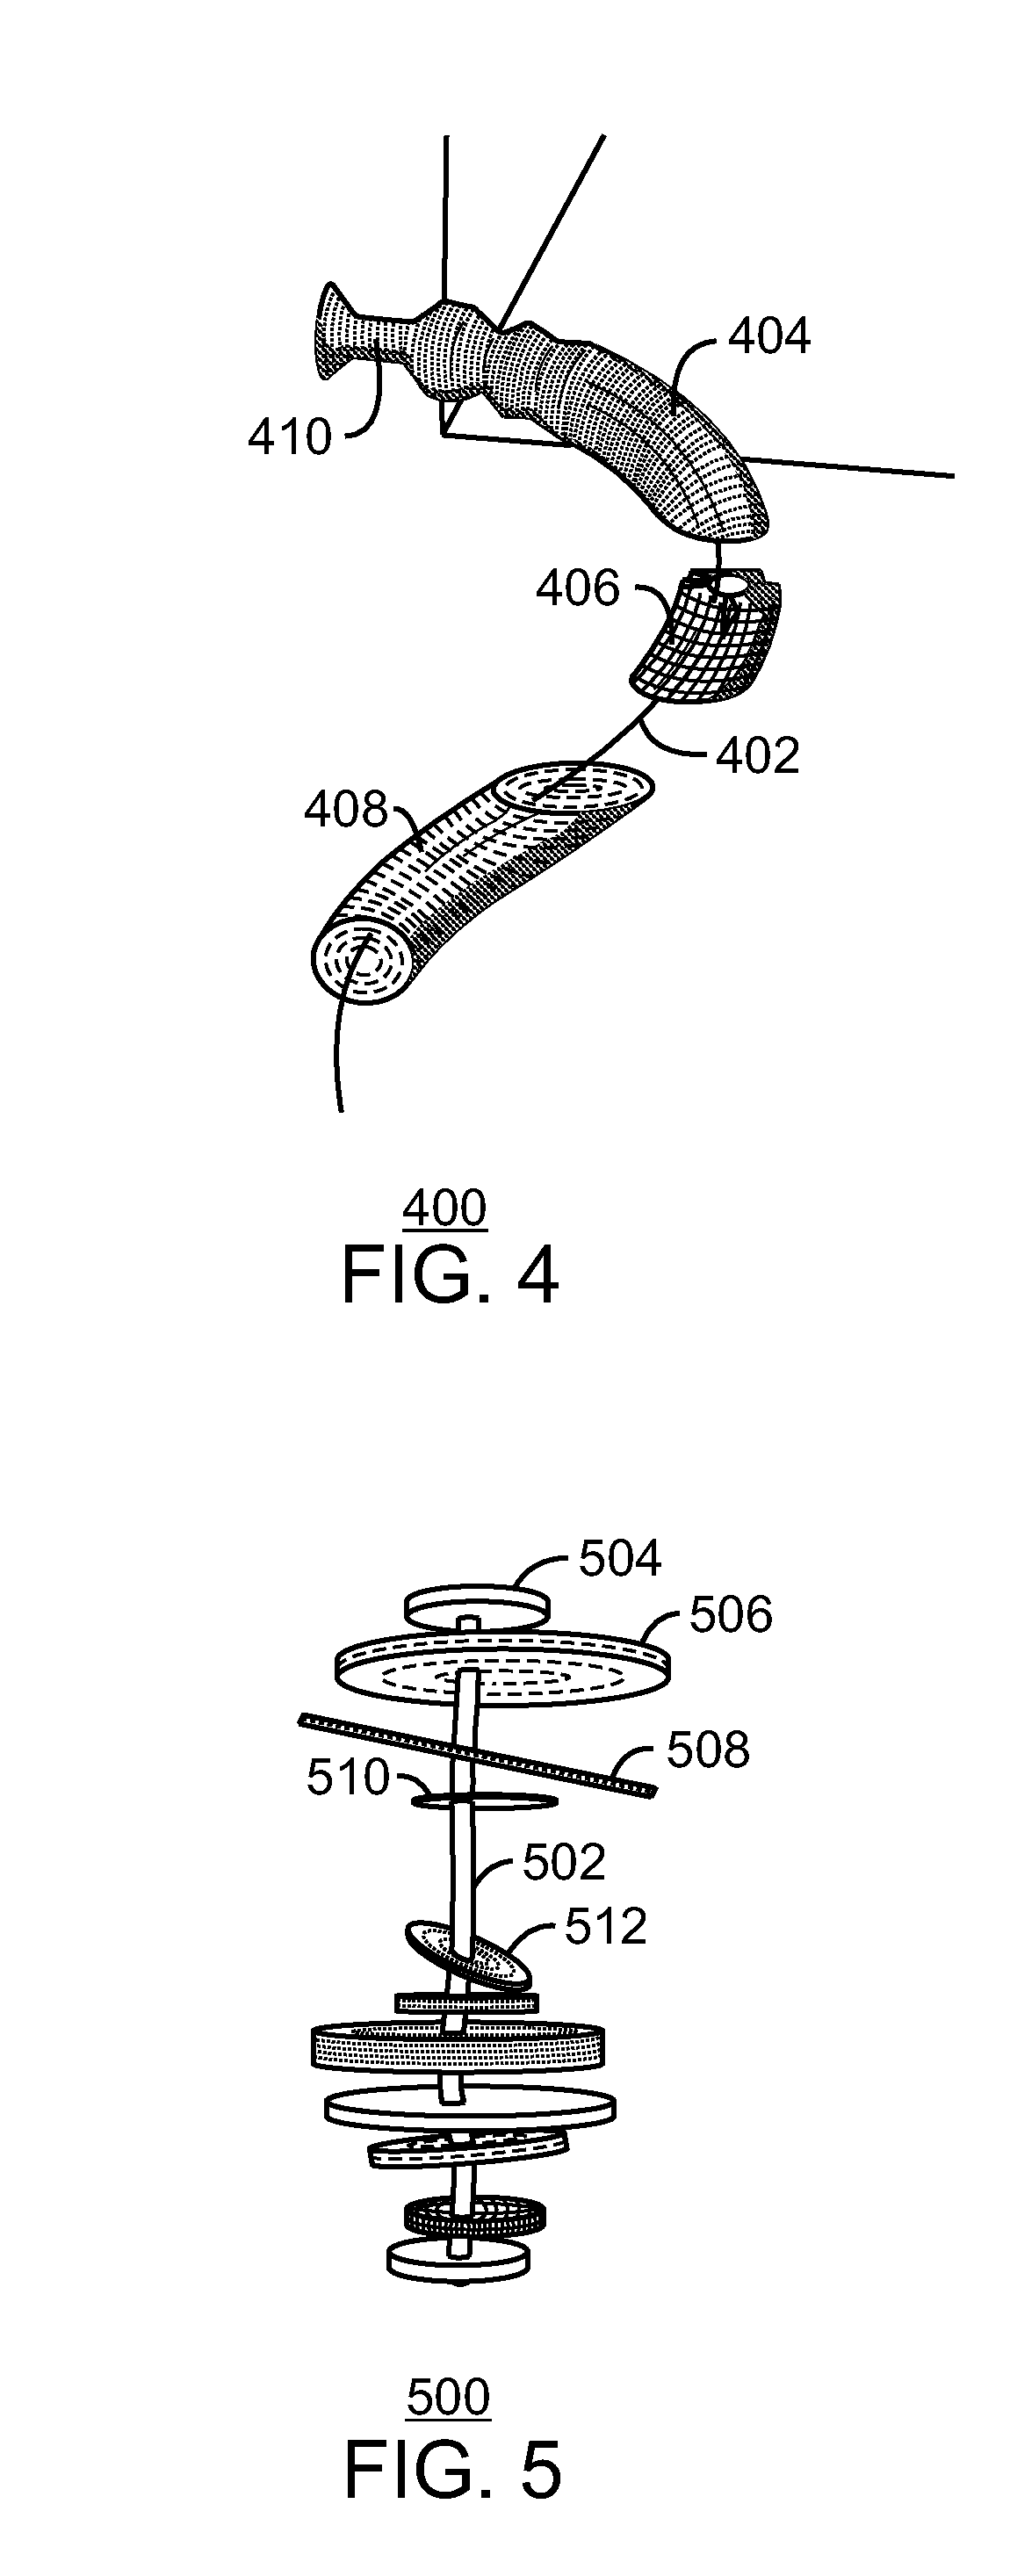 System and Method For Visualizing Data Corresponding To Physical Objects